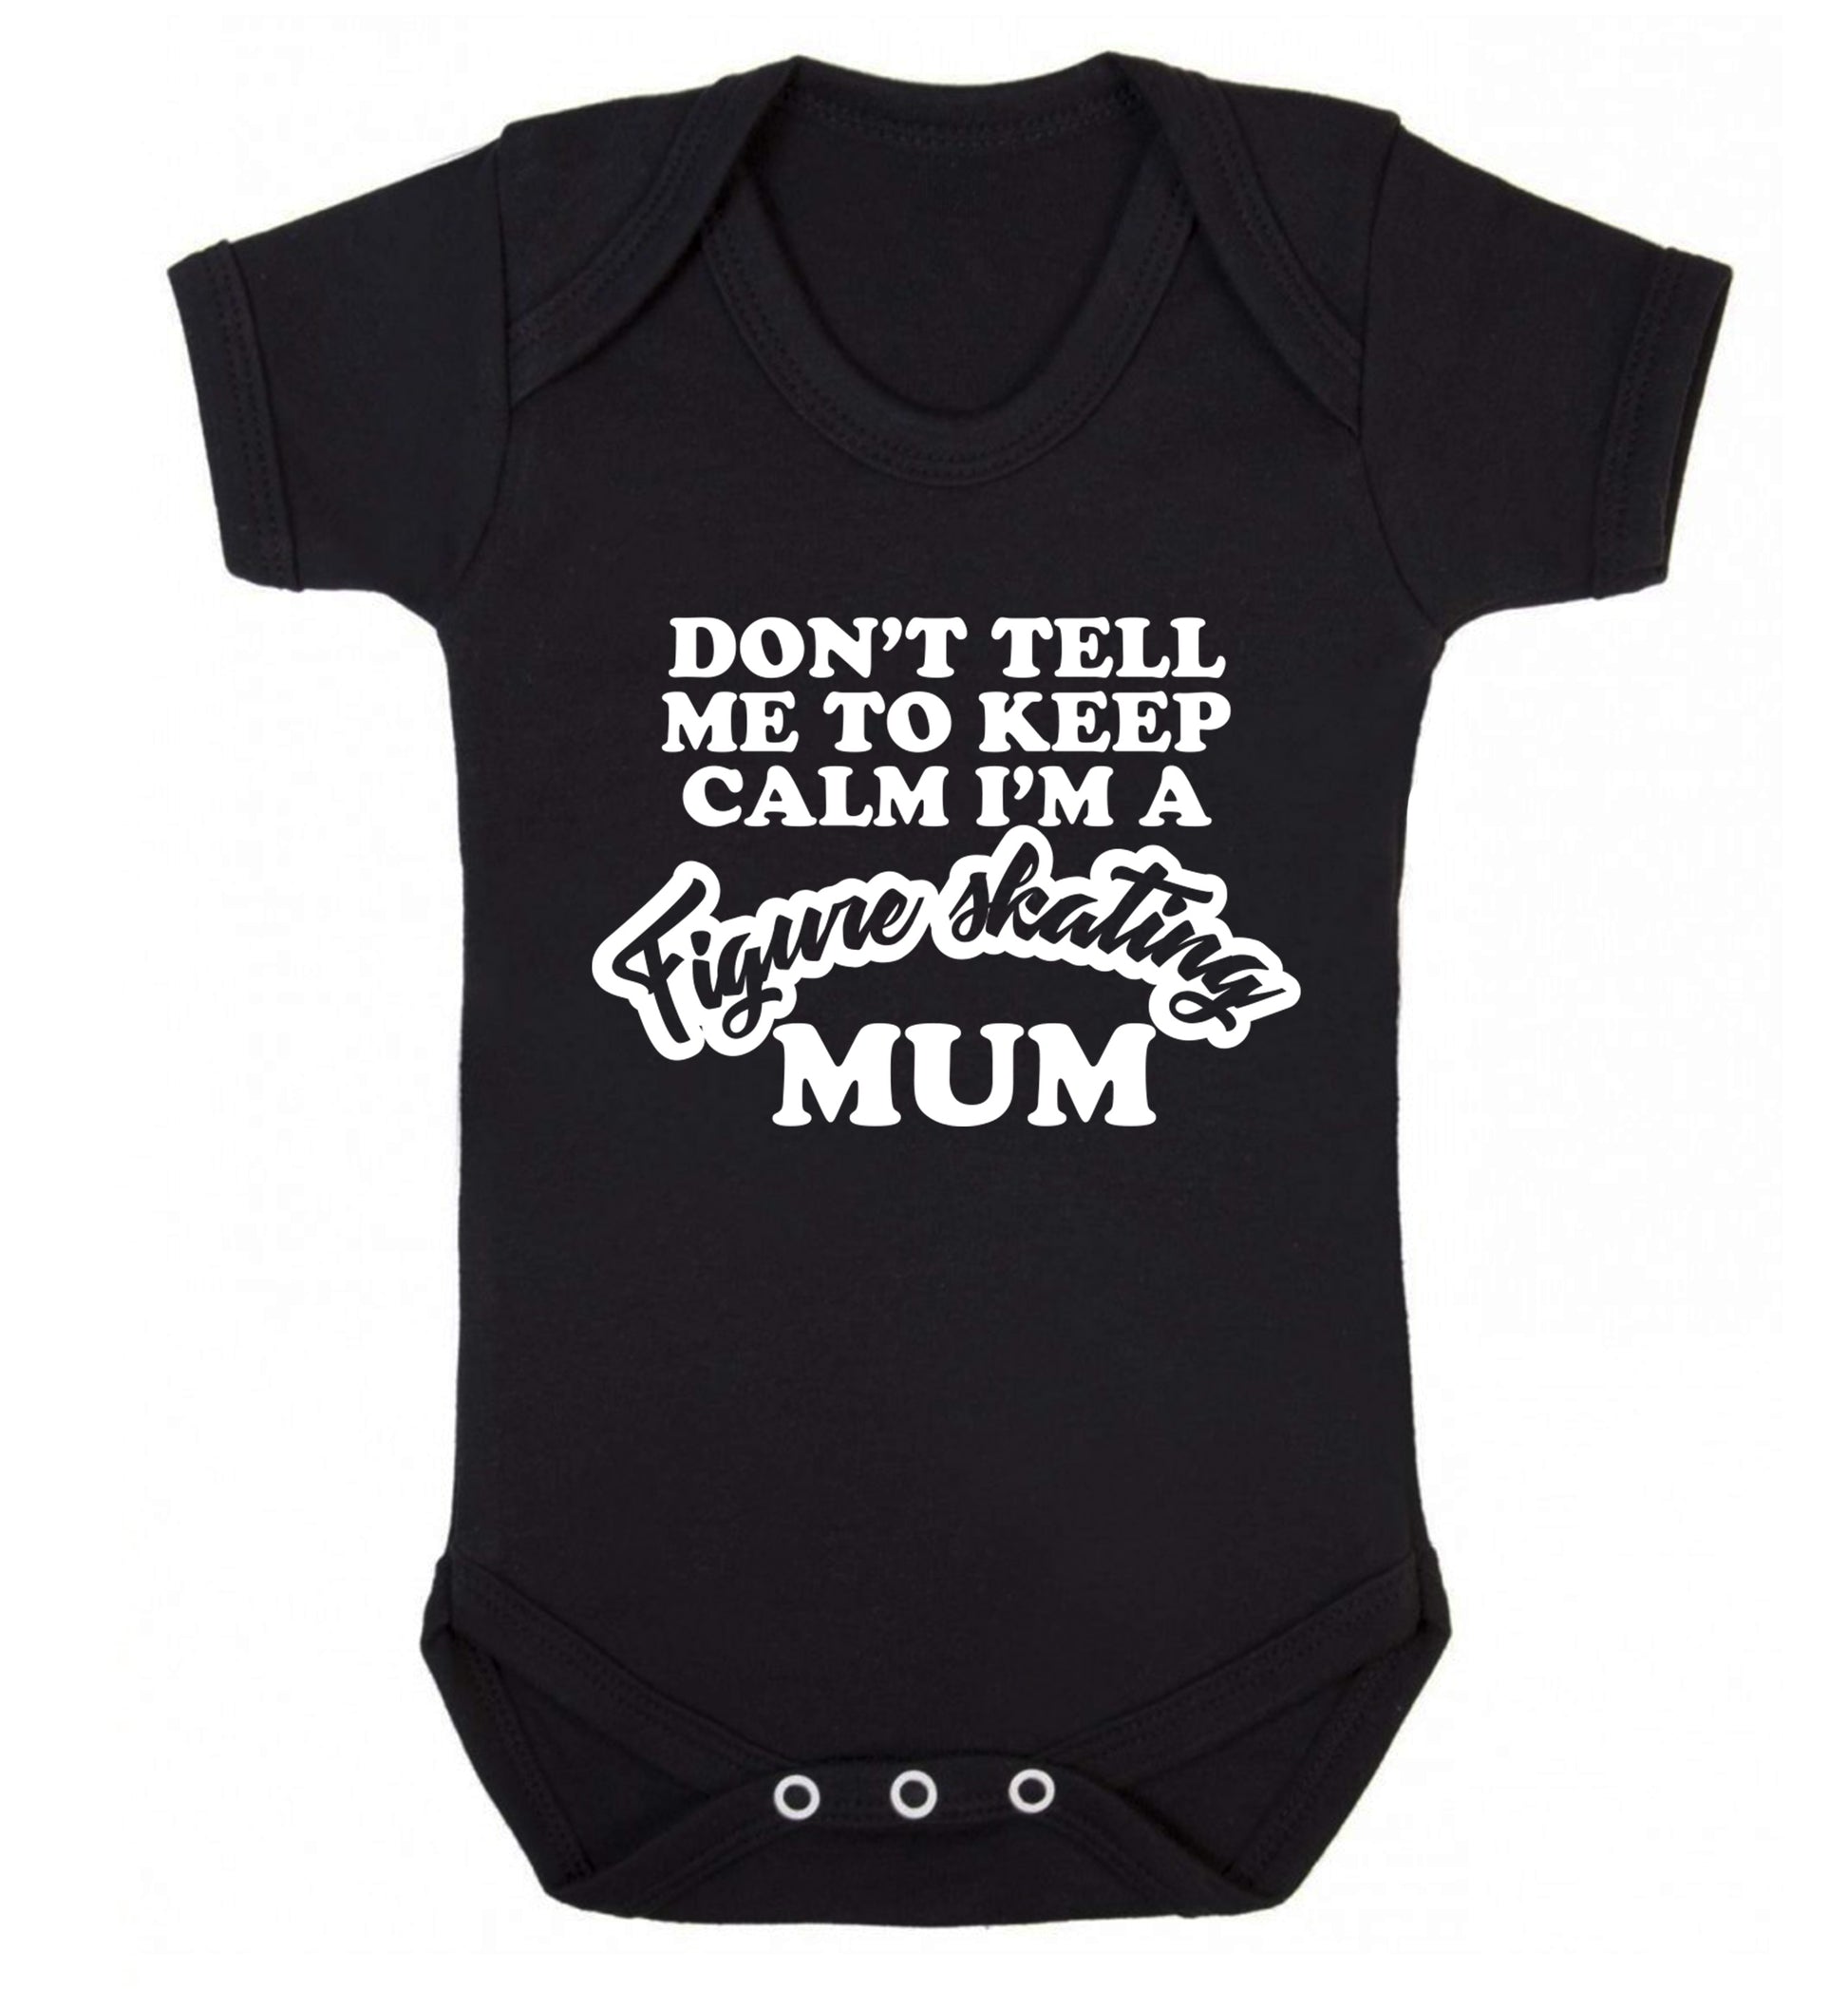 Don't tell me to keep calm I'm a figure skating mum Baby Vest black 18-24 months